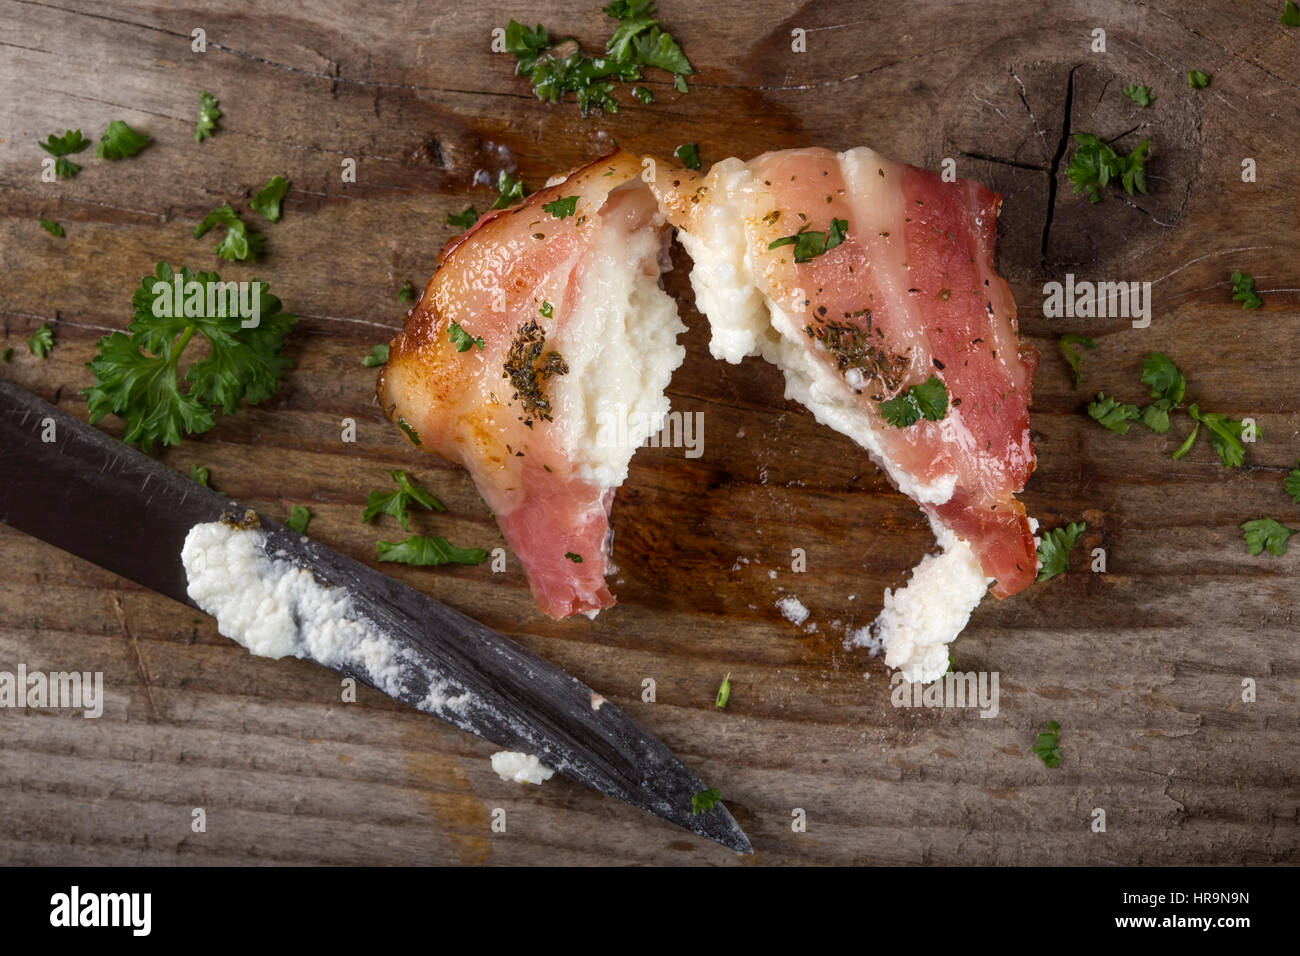 Fried goat cheese wrapped in smoked bacon on wood with knife and parsley Stock Photo